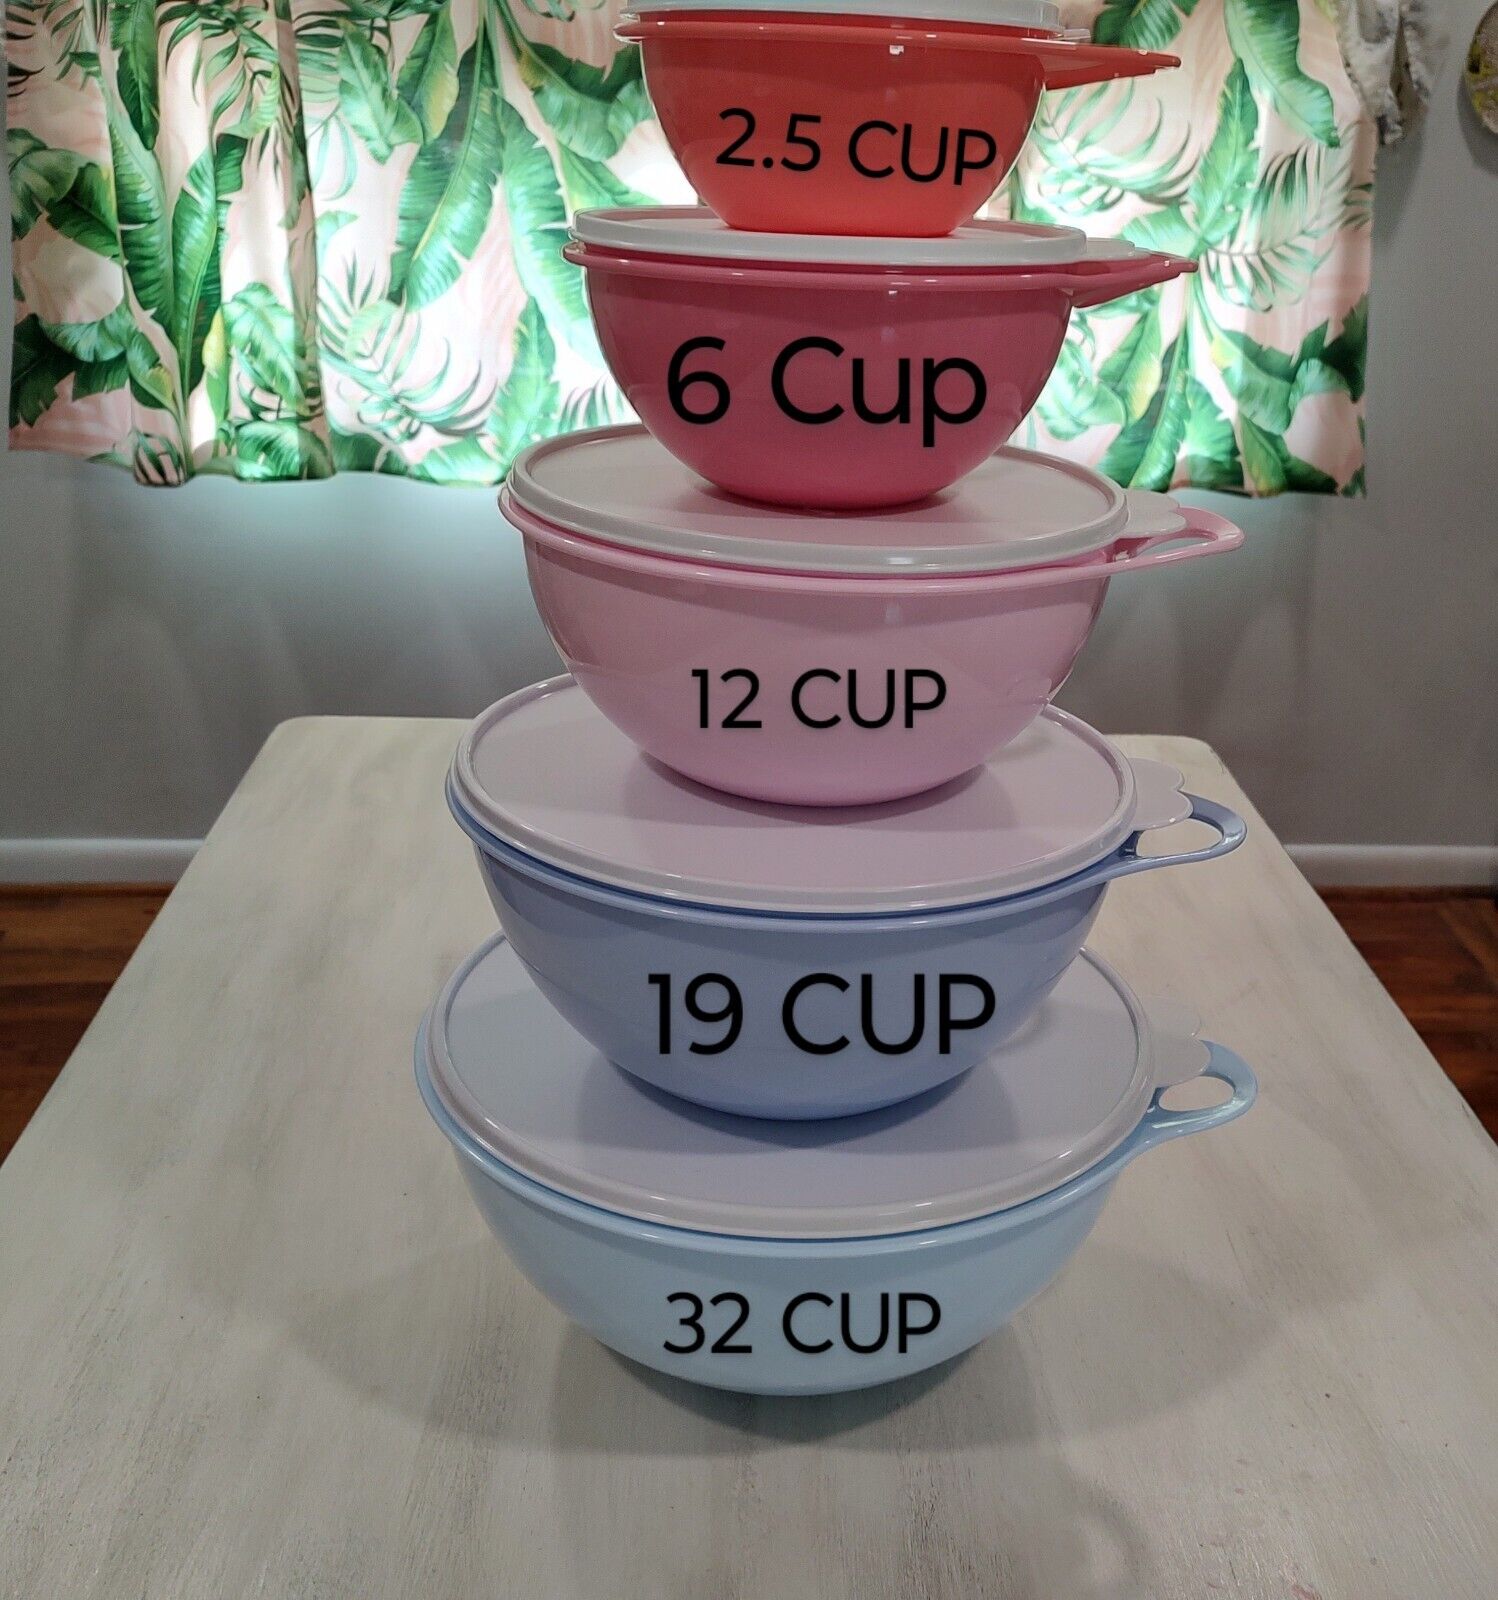 TUPPERWARE THATSA BOWL 5 PC SET PASTEL COLORS 32 Cup 19 Cup 12 Cup 6 Cup 2.5 Cup